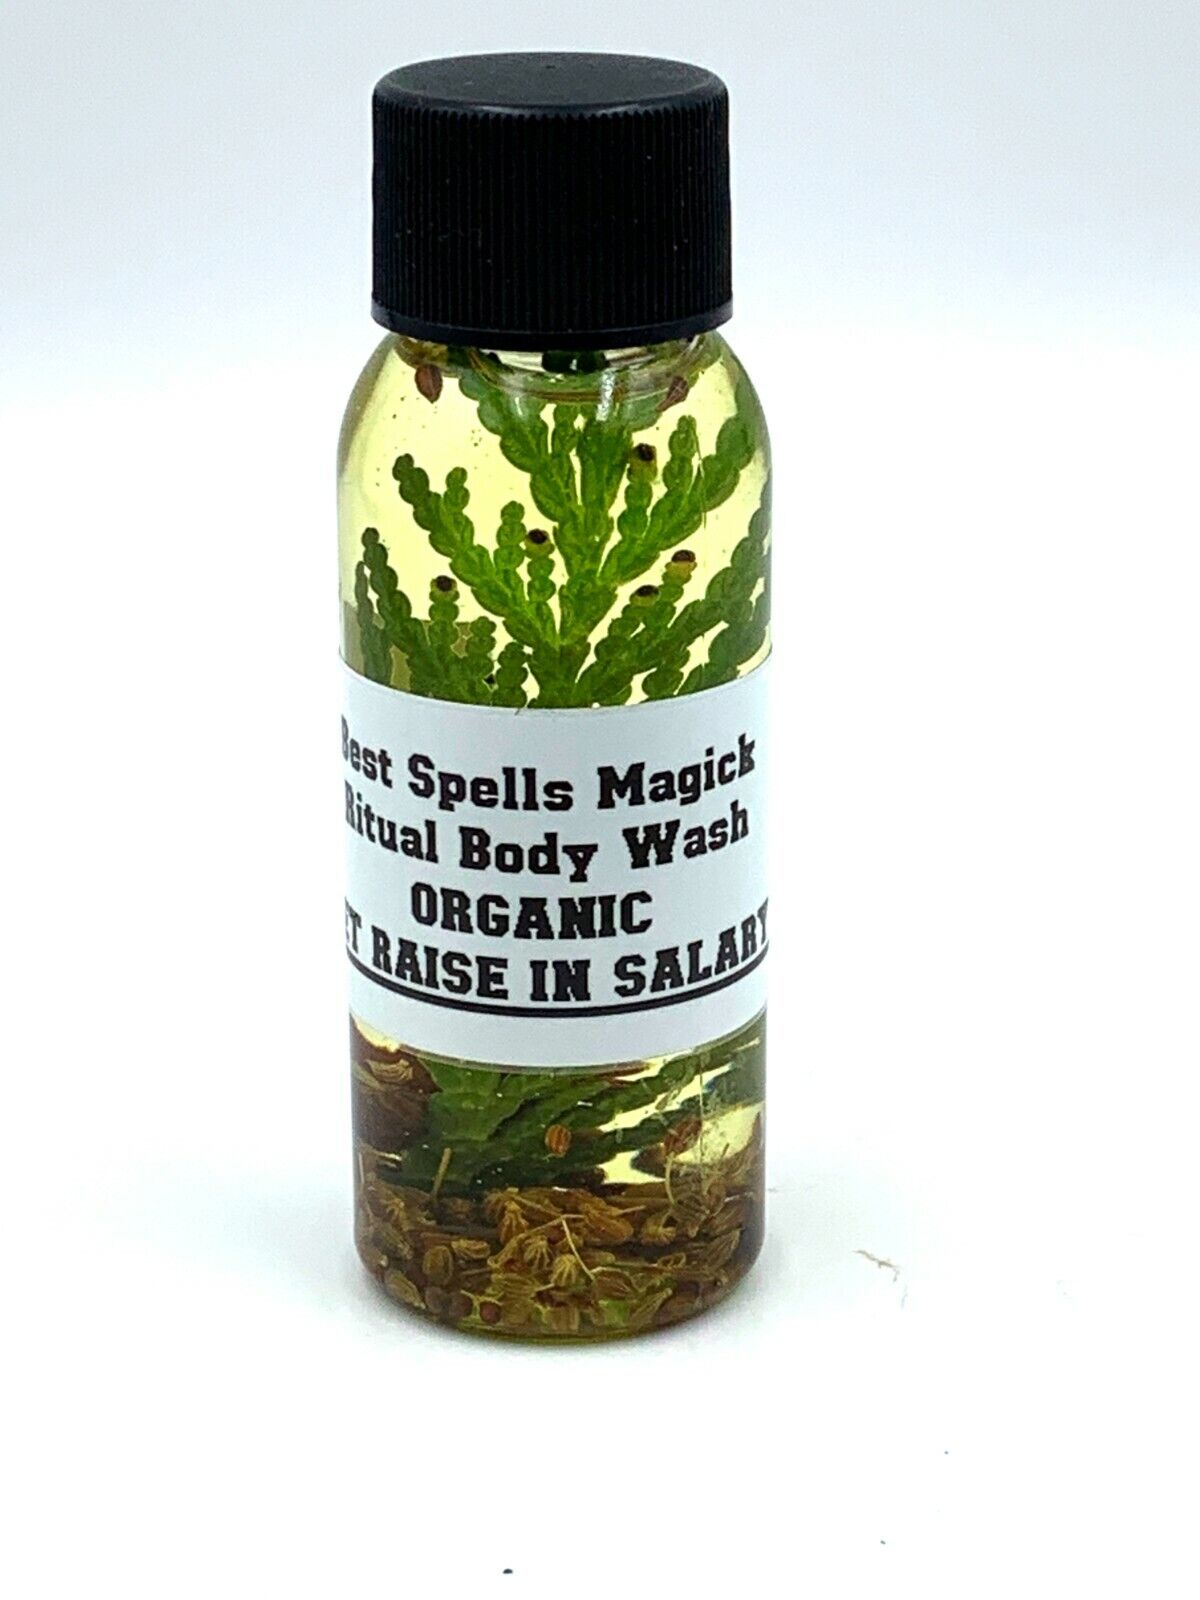 GET RAISE in SALARY Organic Spiritual Blessed Body Wash by Best Spells Magick